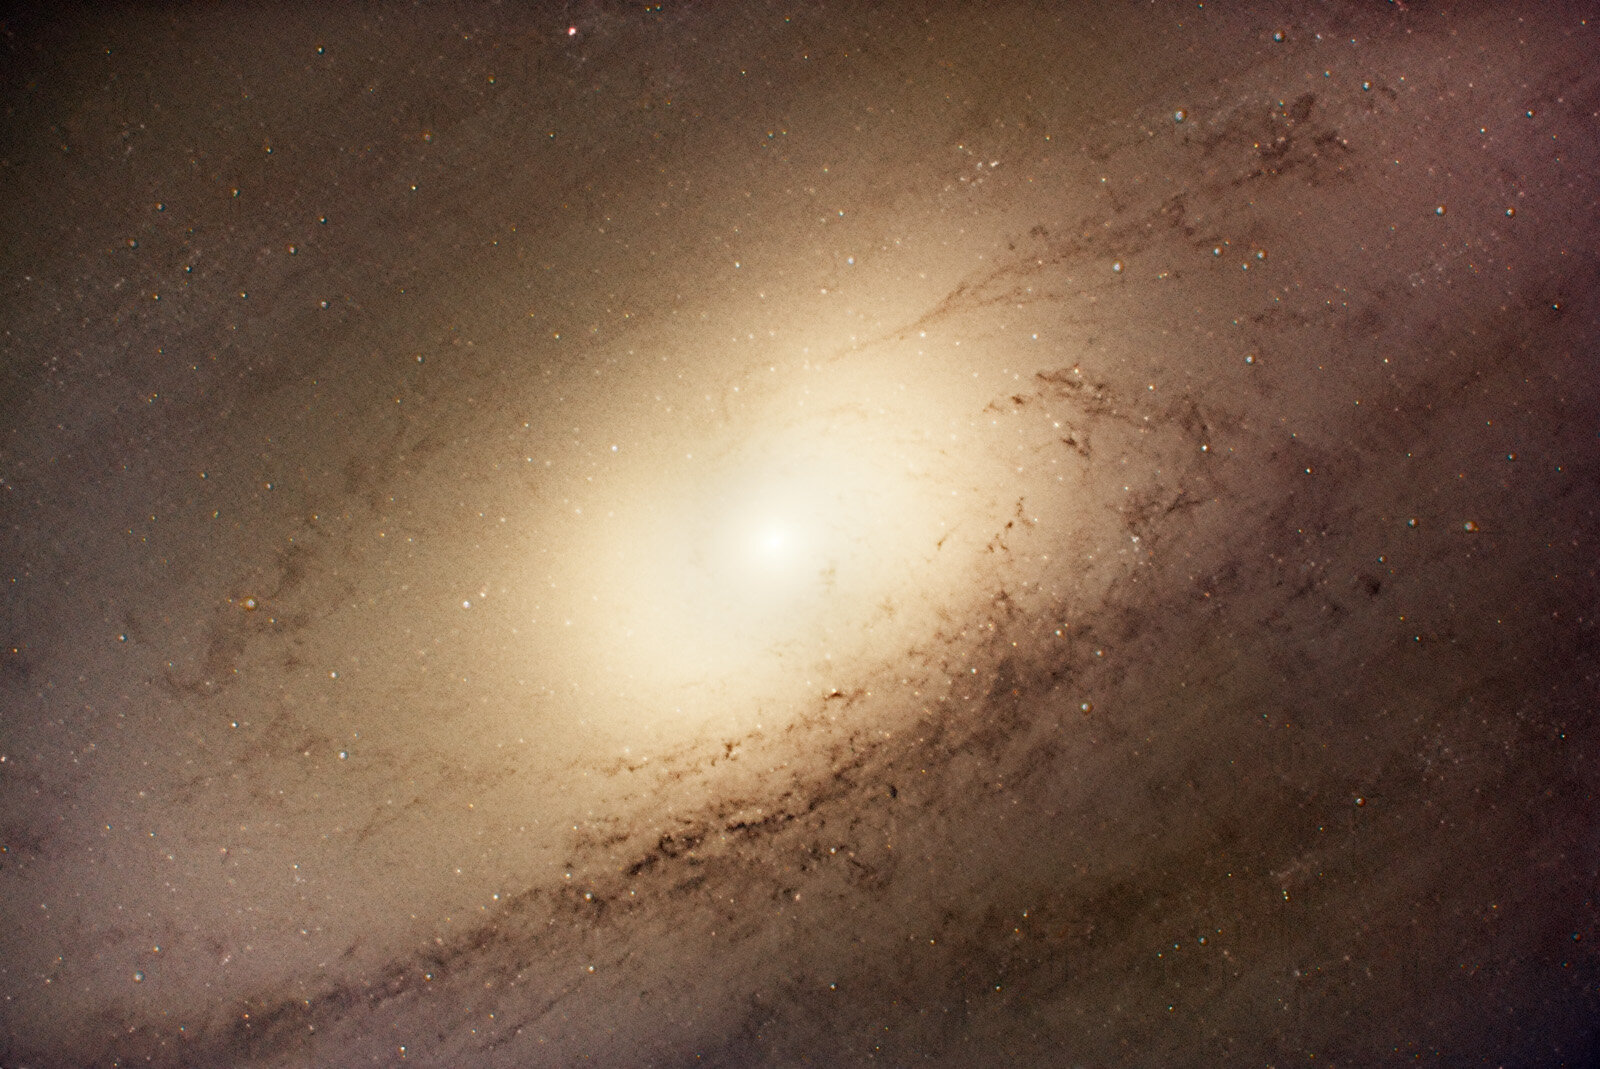 The Dust Lanes of the Great Andromeda Galaxy